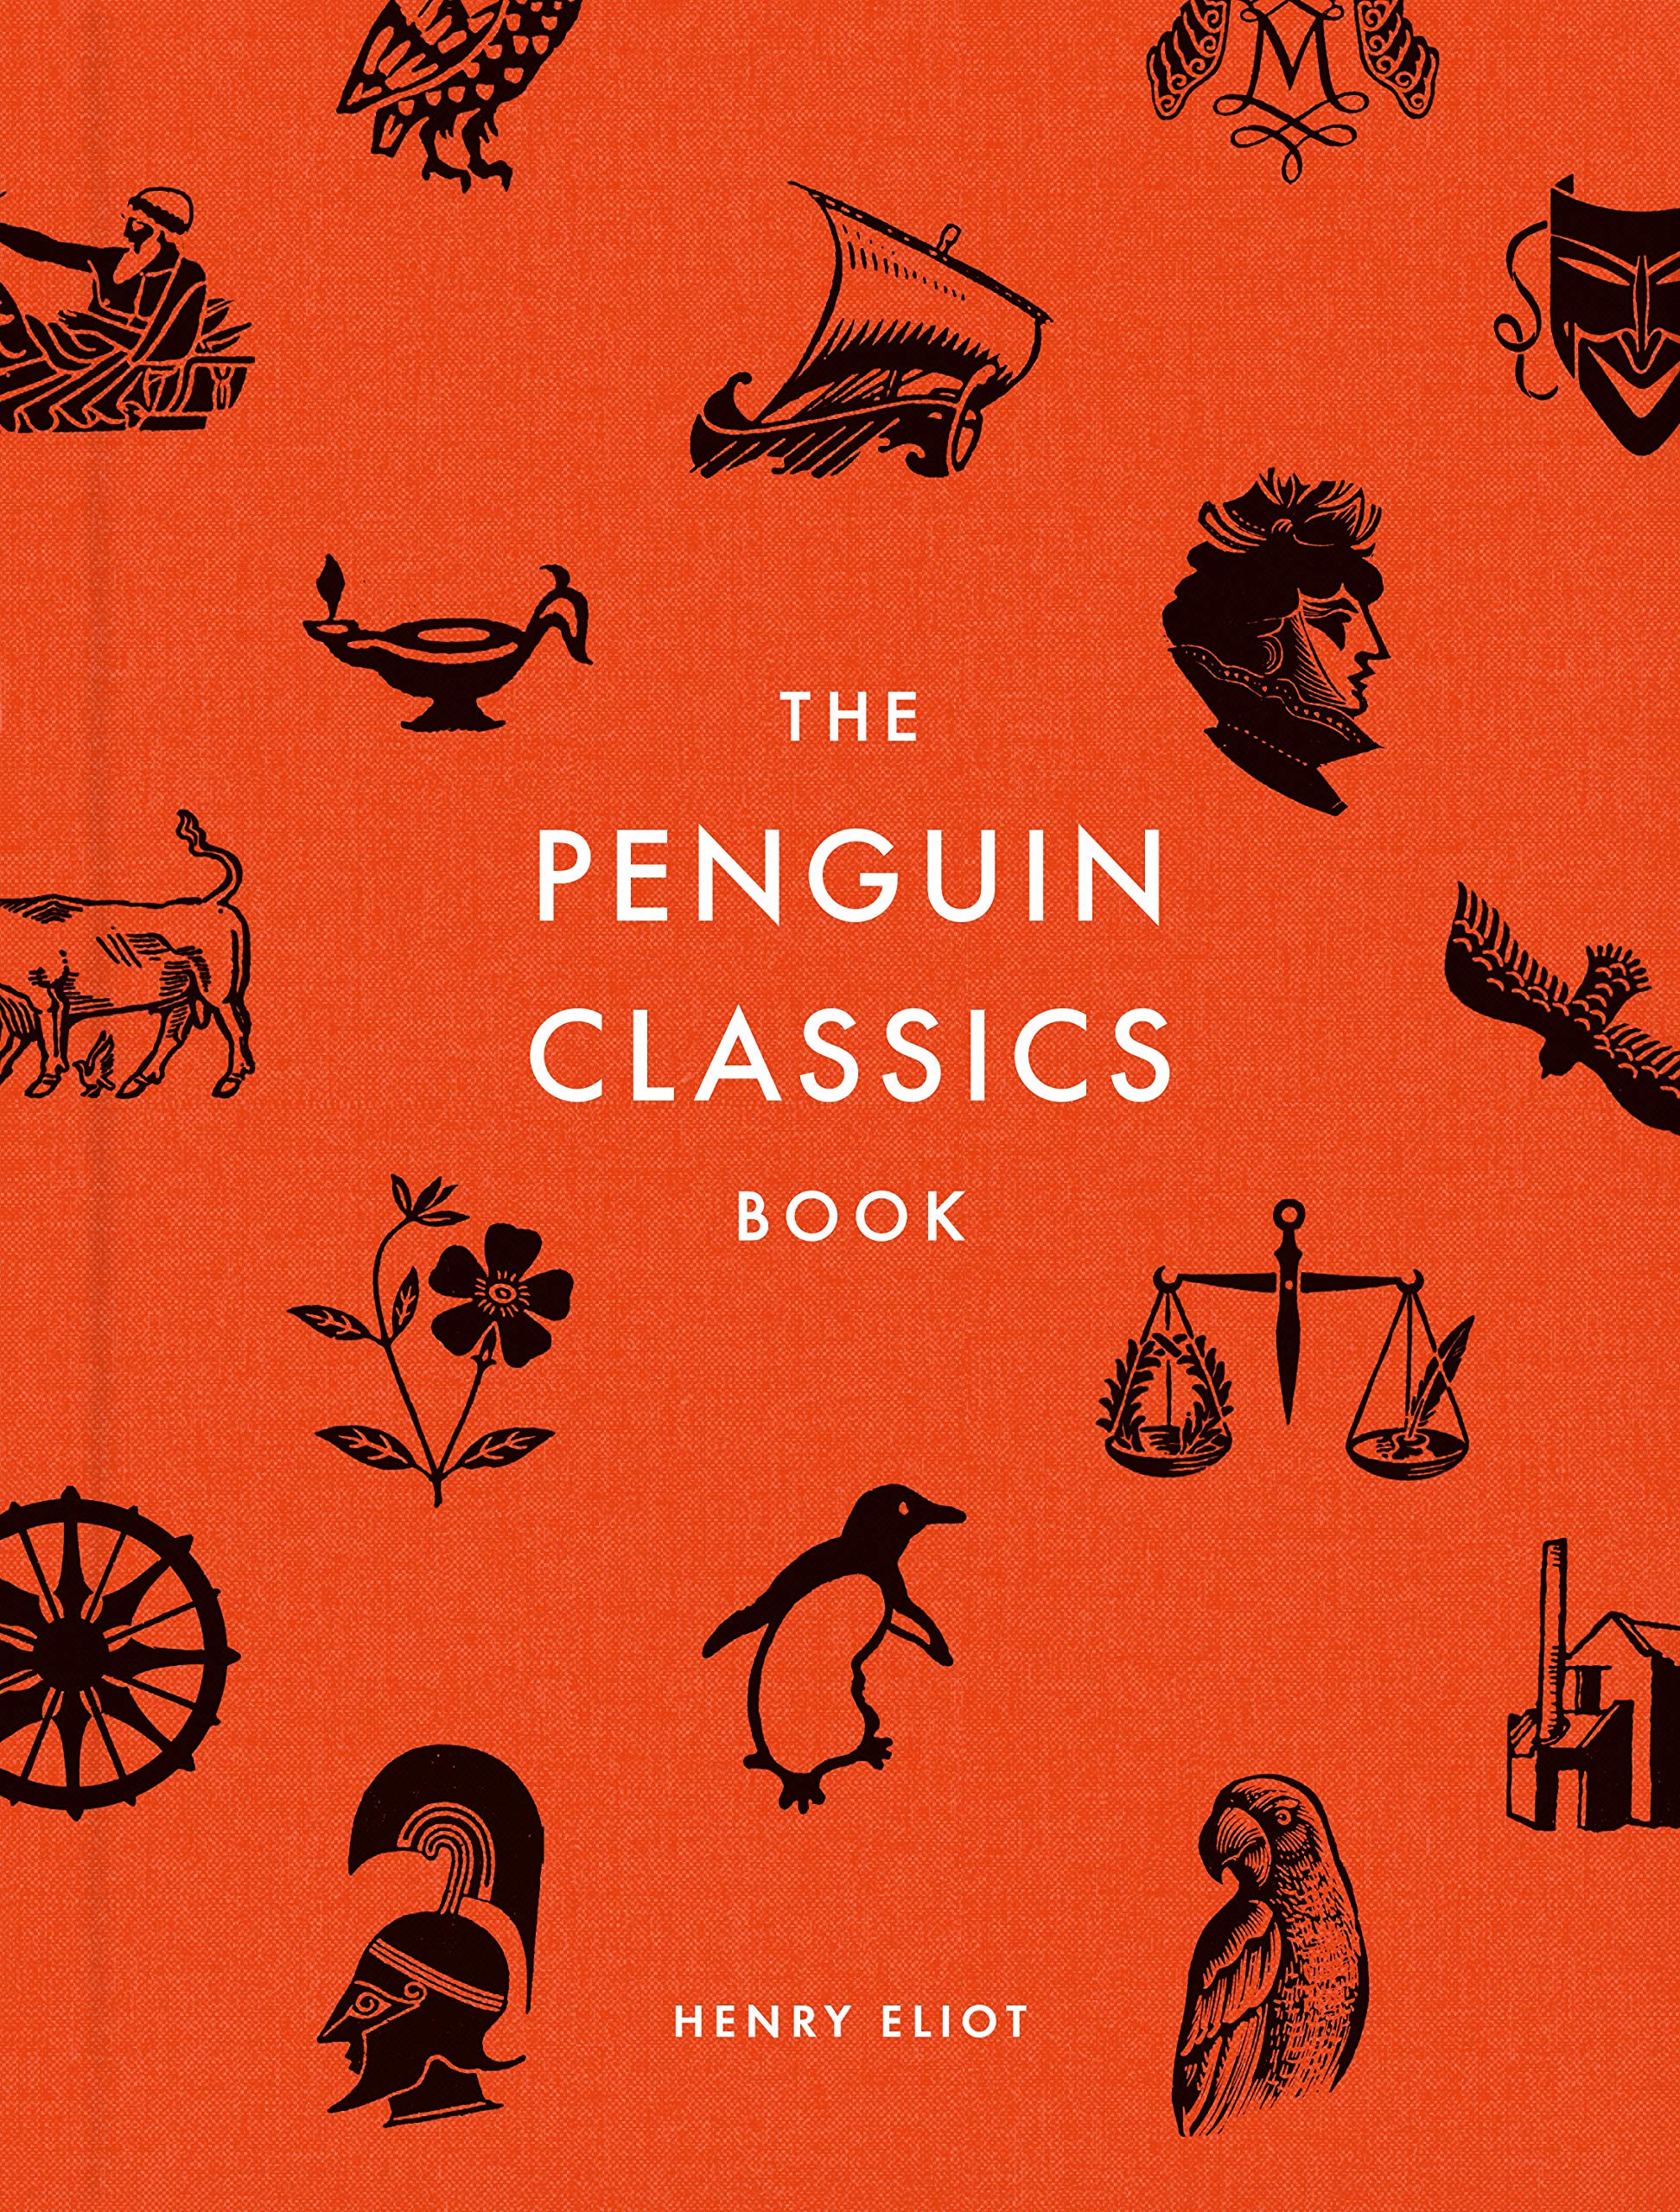 The Penguin Classics Book: In Search of the Best Books Ever Written